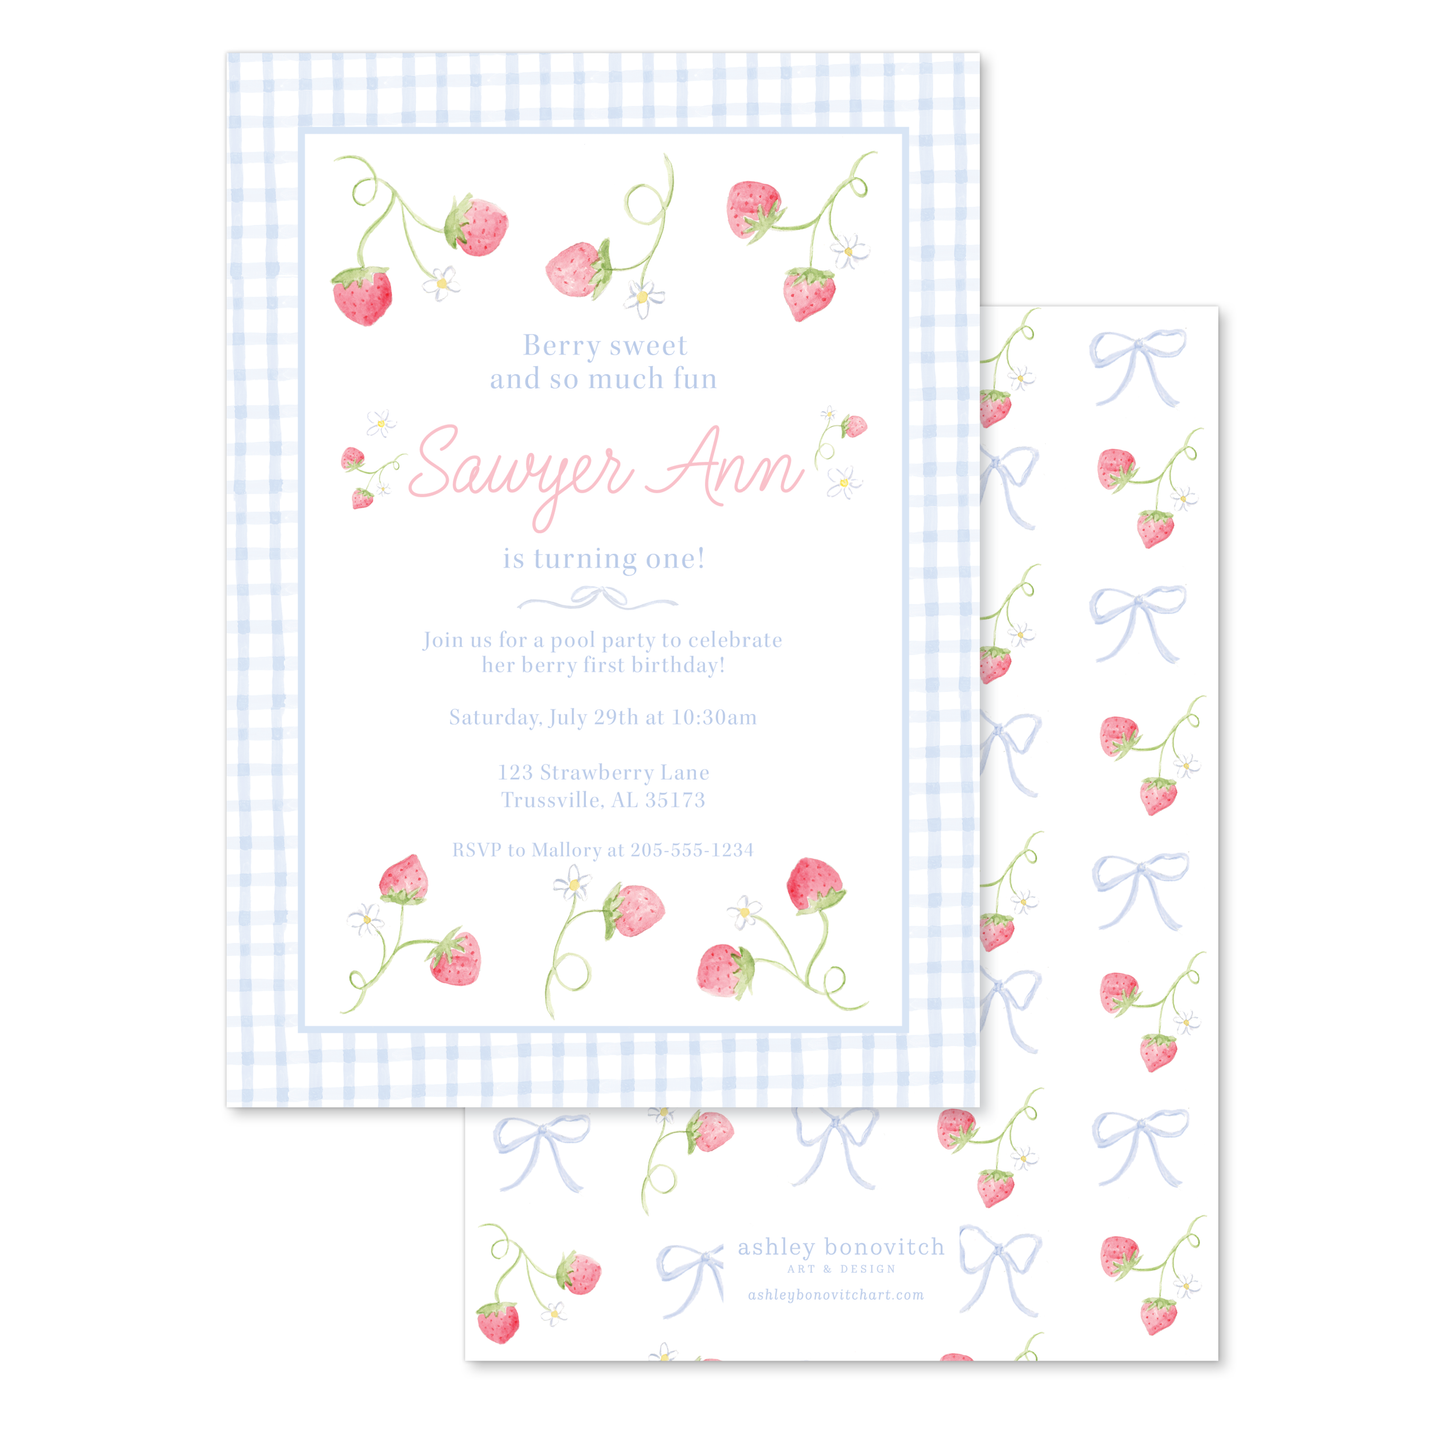 Berry Sweet Party Invitation